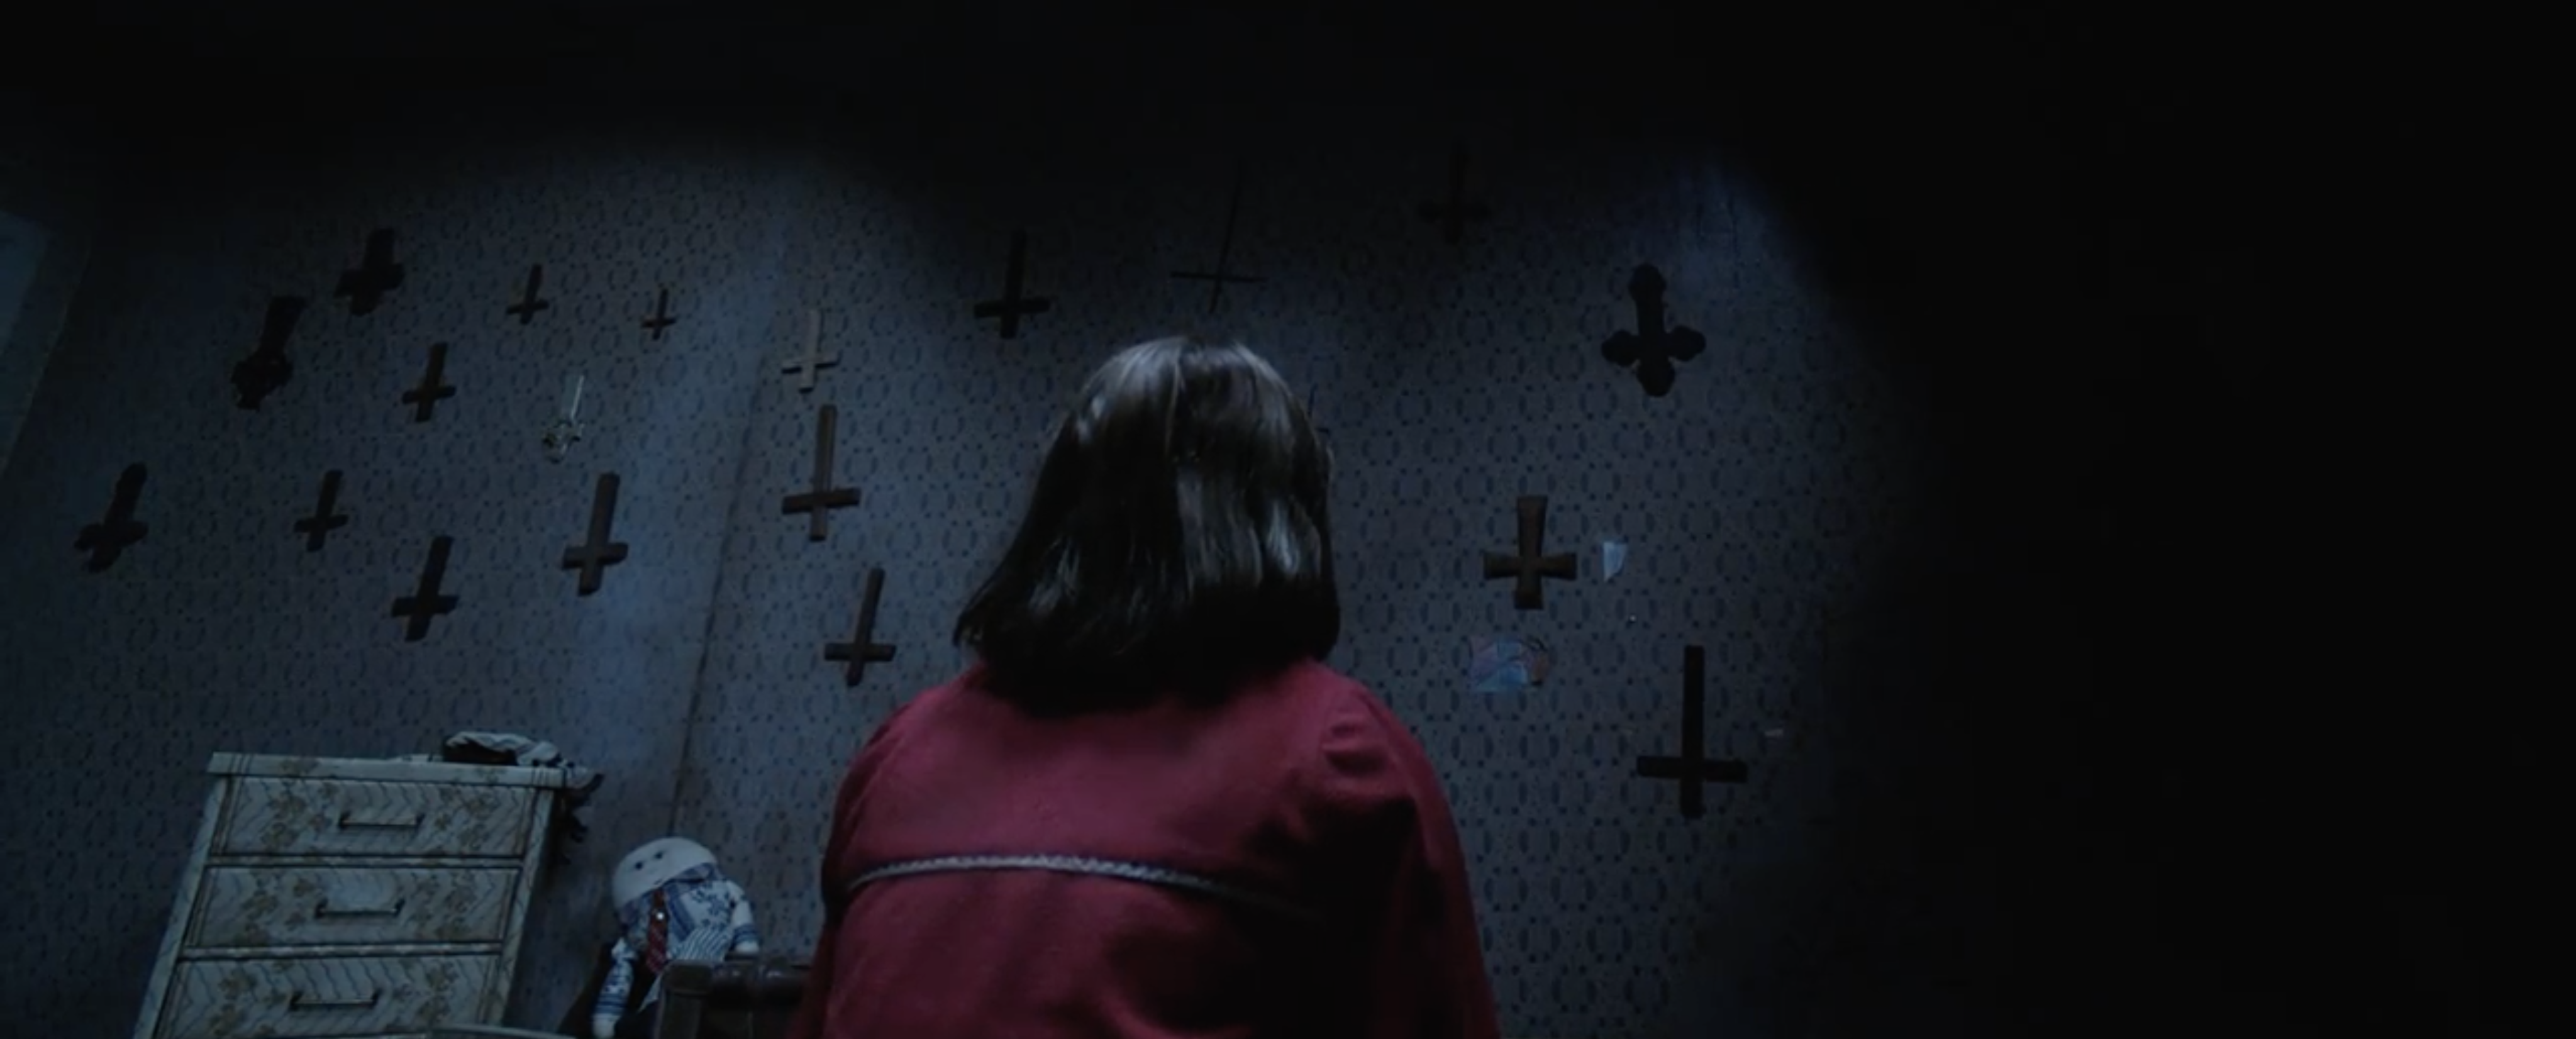 THE CONJURING 2 | image via Warner Bros. Pictures